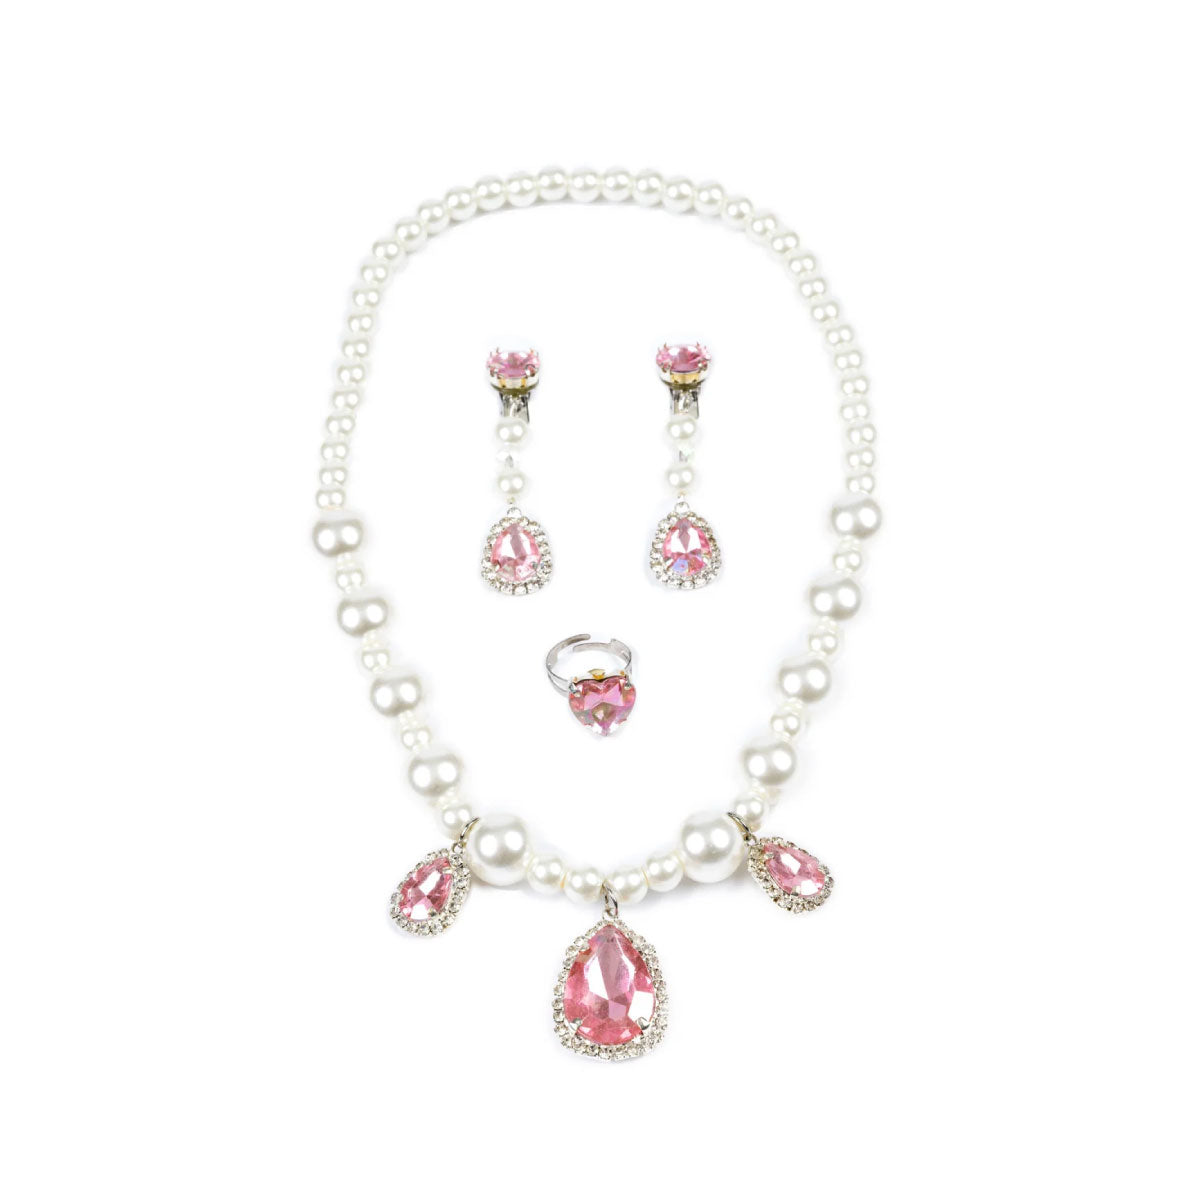 The Coco Jewelry Set from Great Pretenders